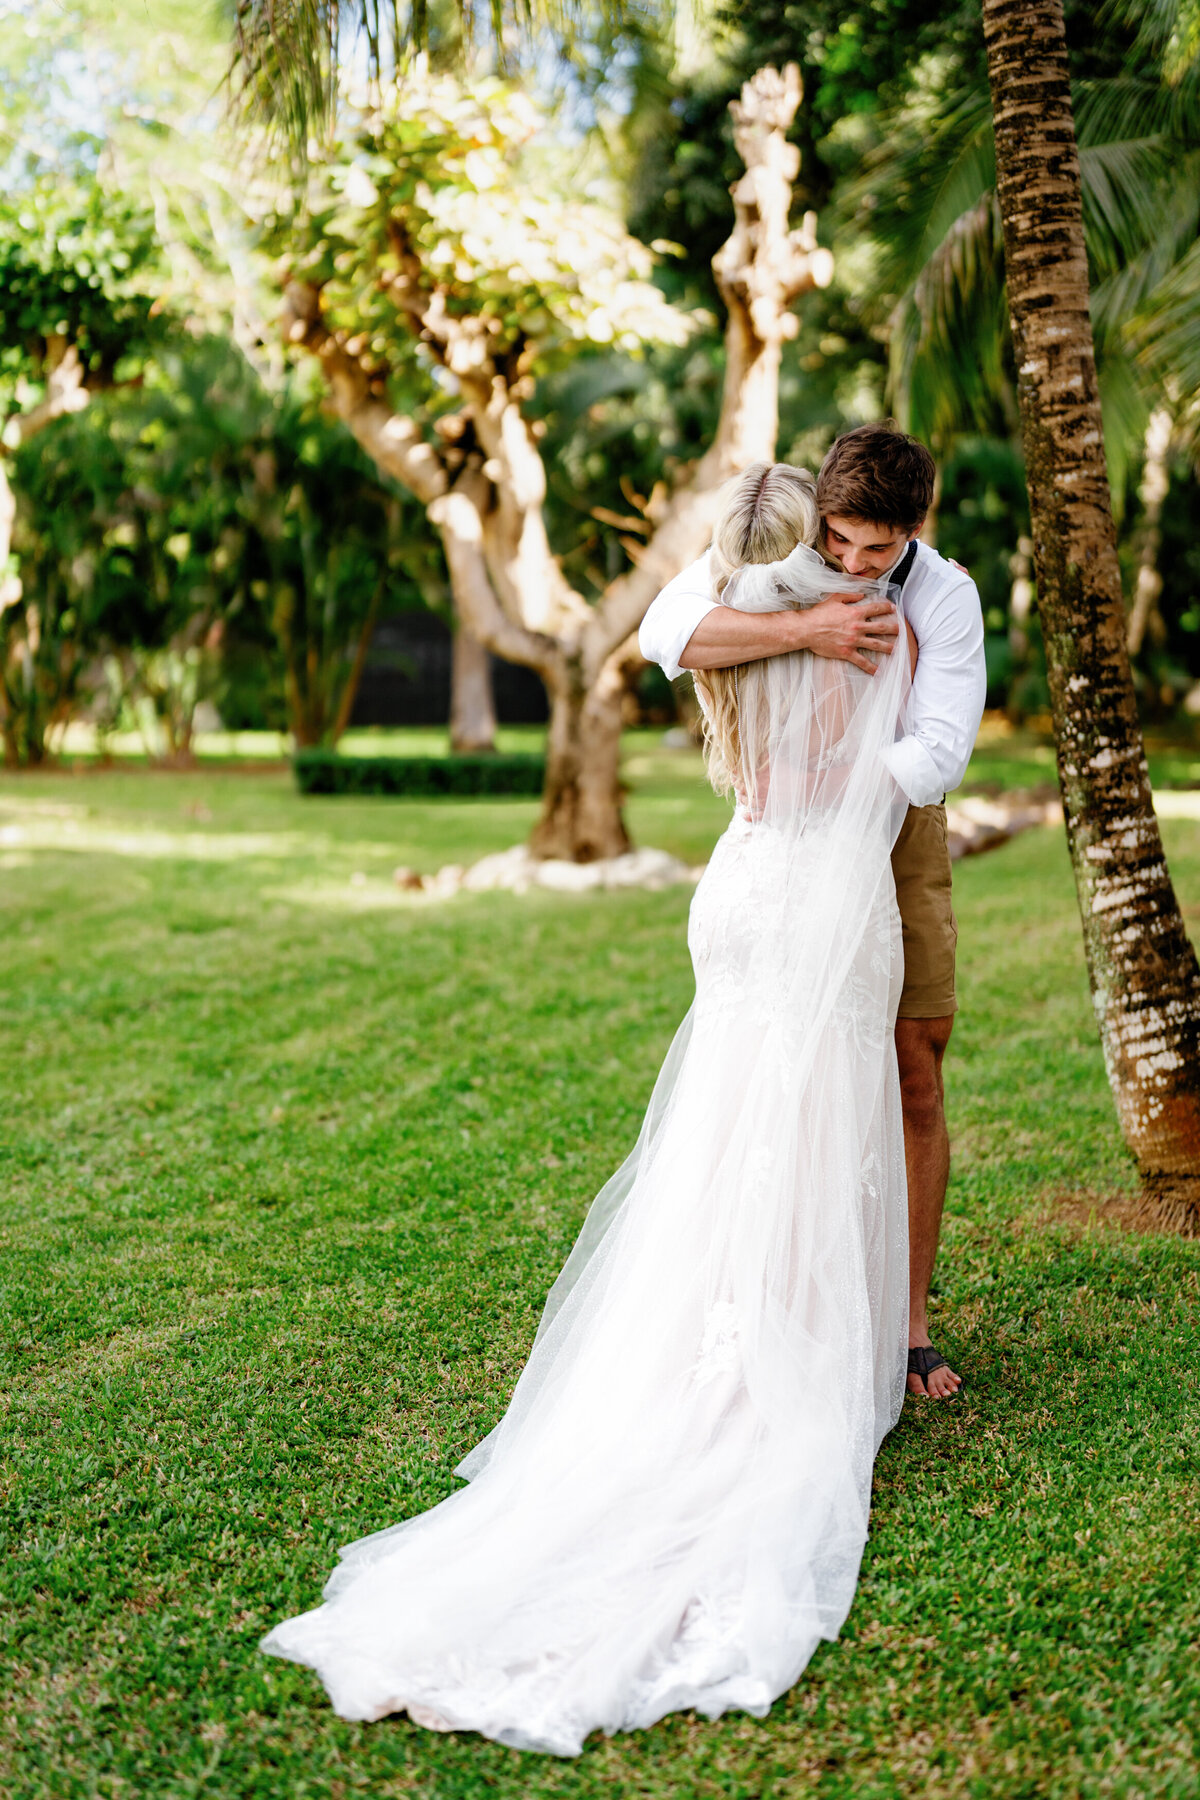 Aspen-Avenue-Florida-Wedding-Photographer-Jamaica-Tropical-Whismical-First-Look-Brother